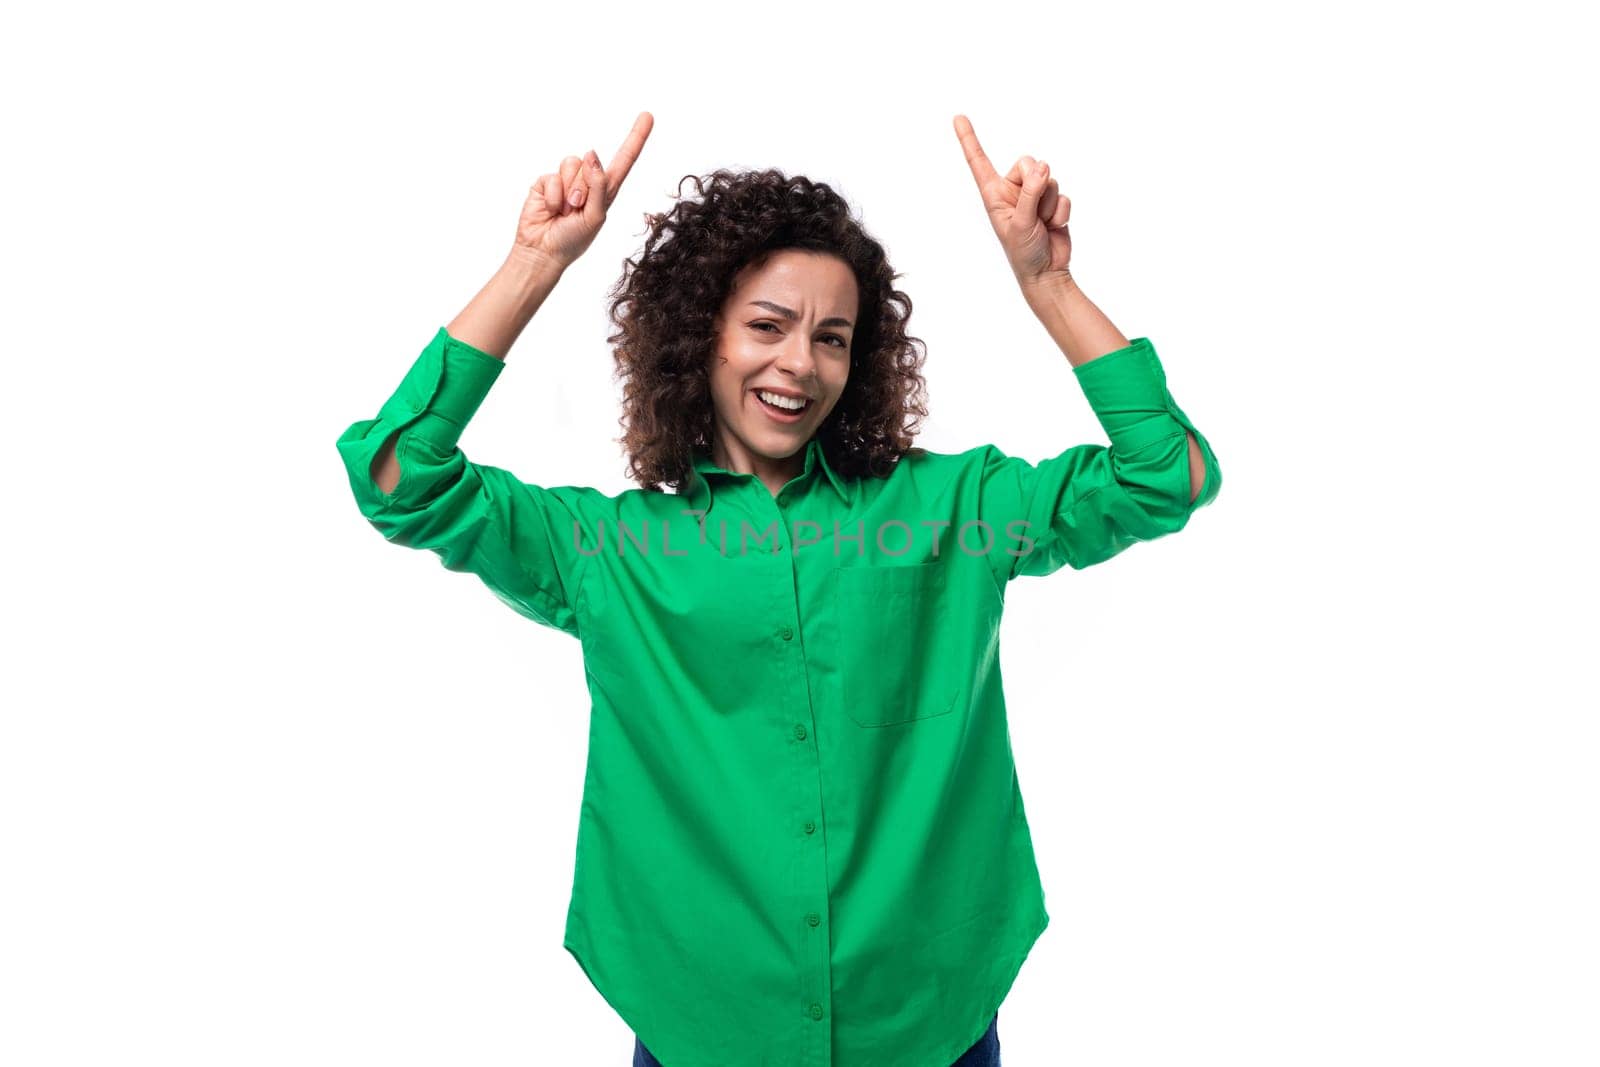 young office woman with curly hair dressed in a green shirt points her fingers up by TRMK